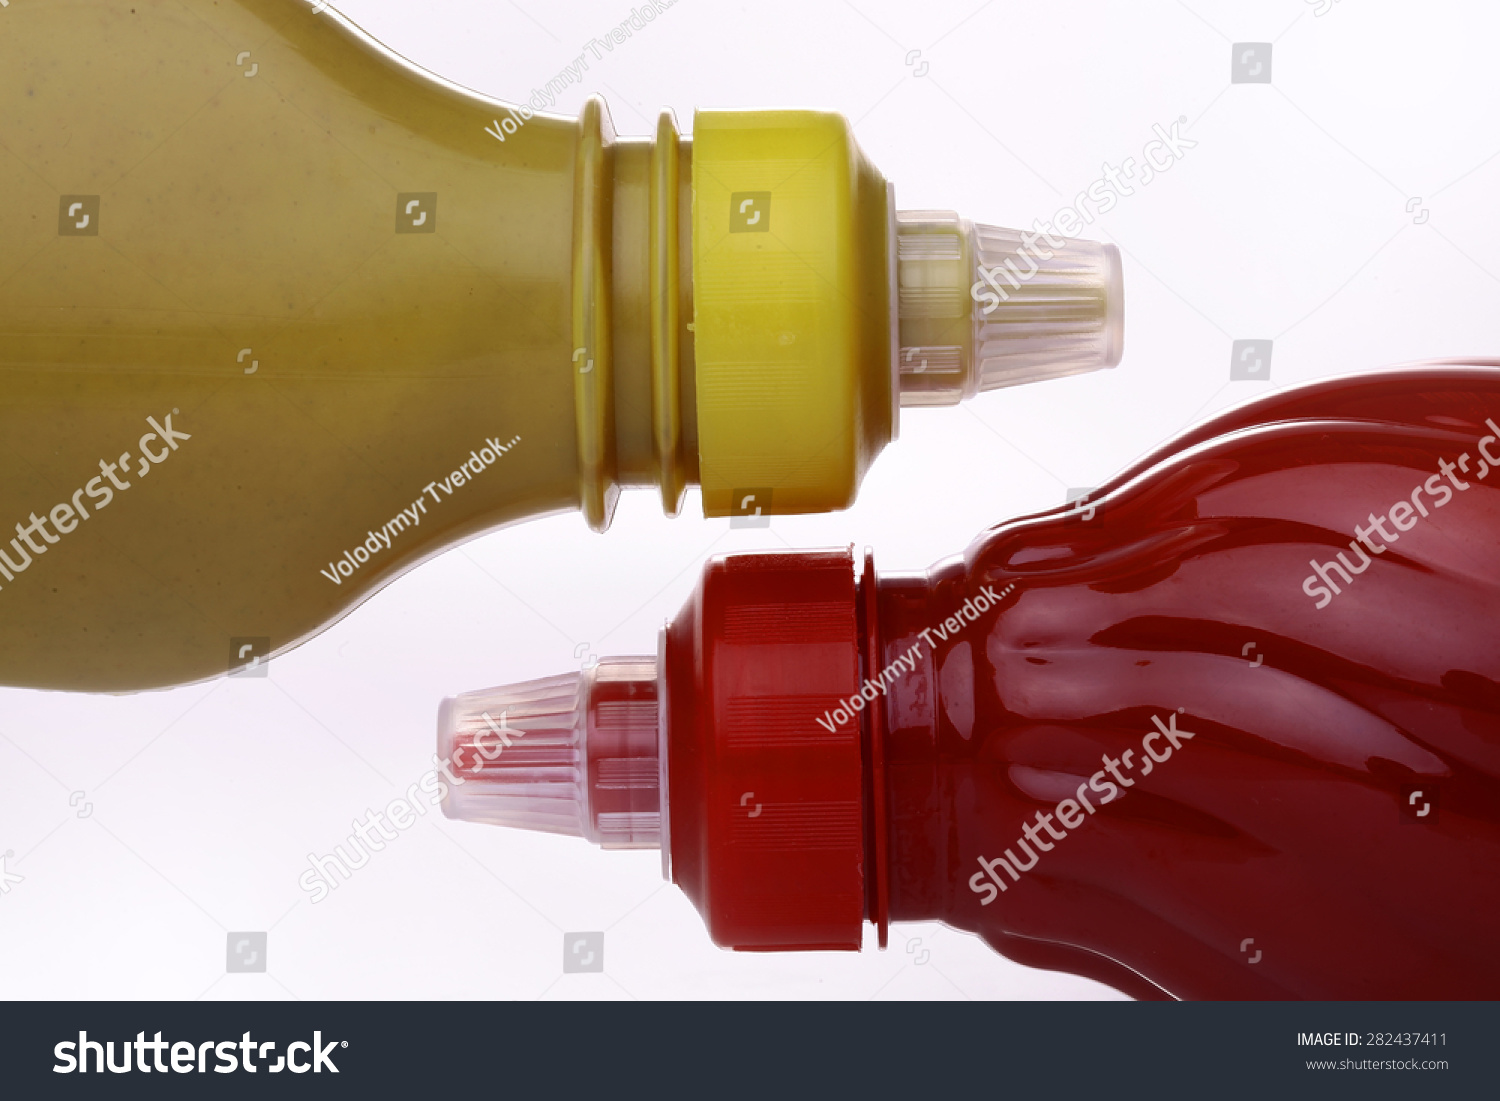 Download Bright Red Dark Yellow Bottles Ketchup Stock Photo Edit Now 282437411 PSD Mockup Templates